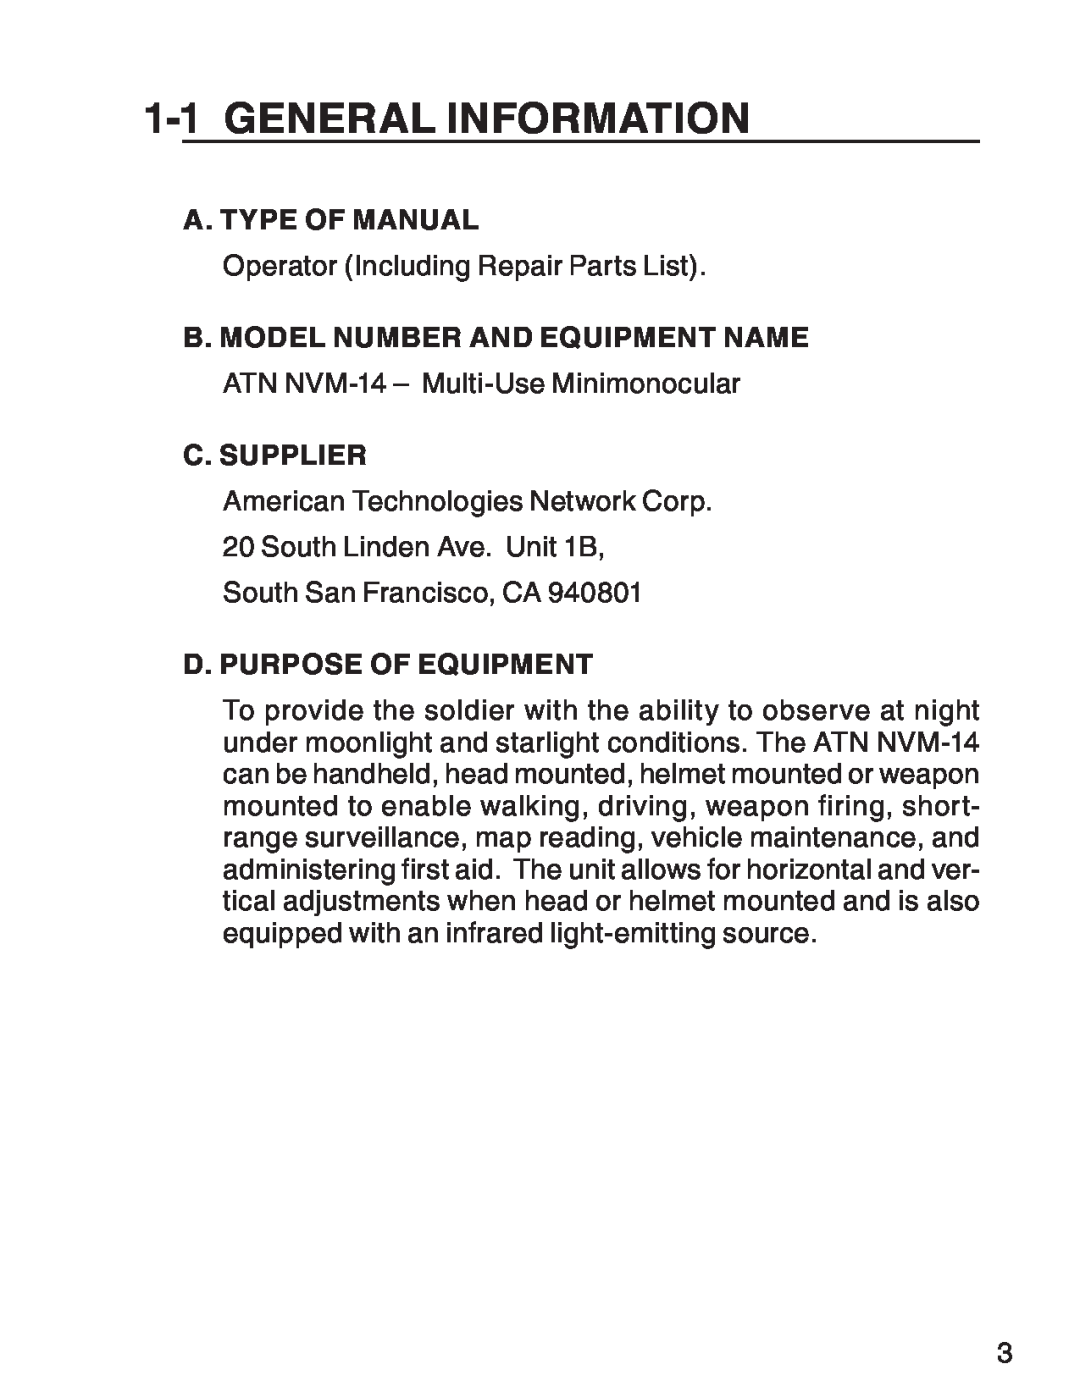 ATN 3 General Information, a. Type of Manual, b. Model Number and Equipment Name, c. Supplier, d. Purpose of Equipment 